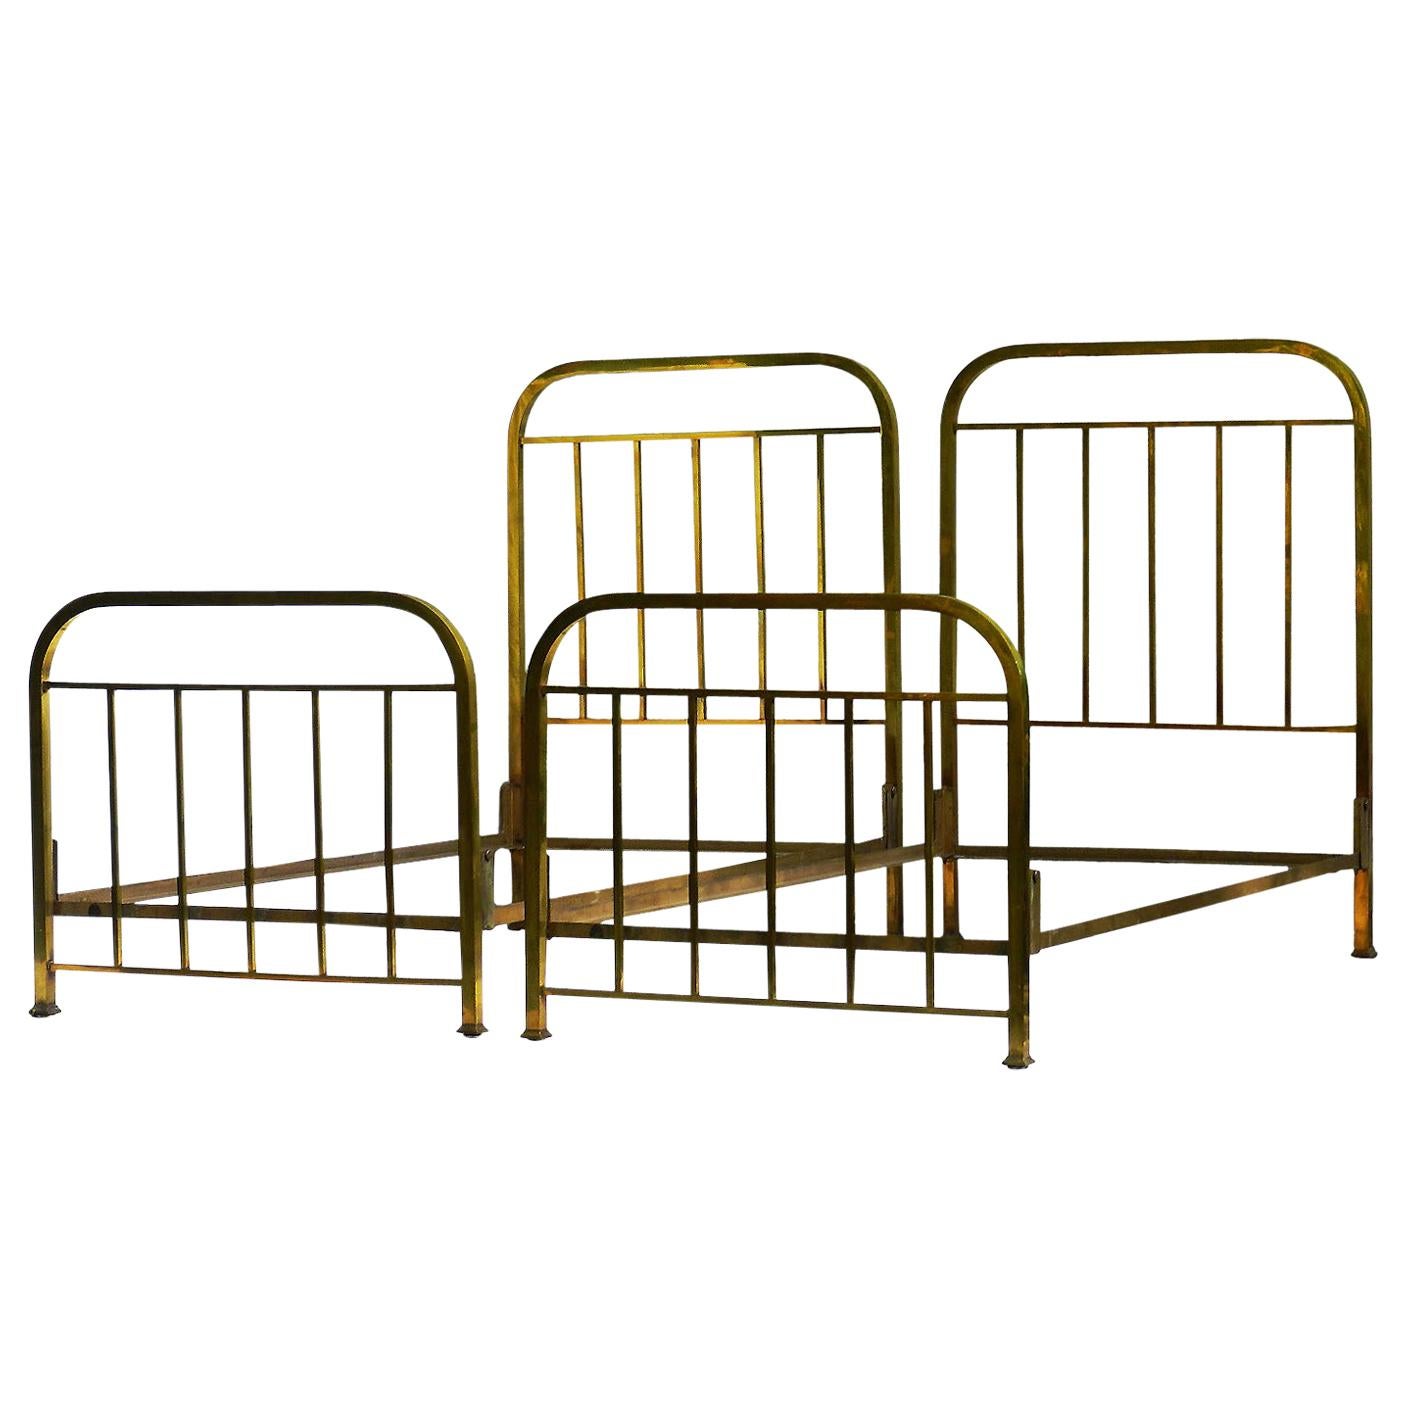 Pair of Art Deco Brass Beds Antique French Single Twin circa 1930 Makers Label